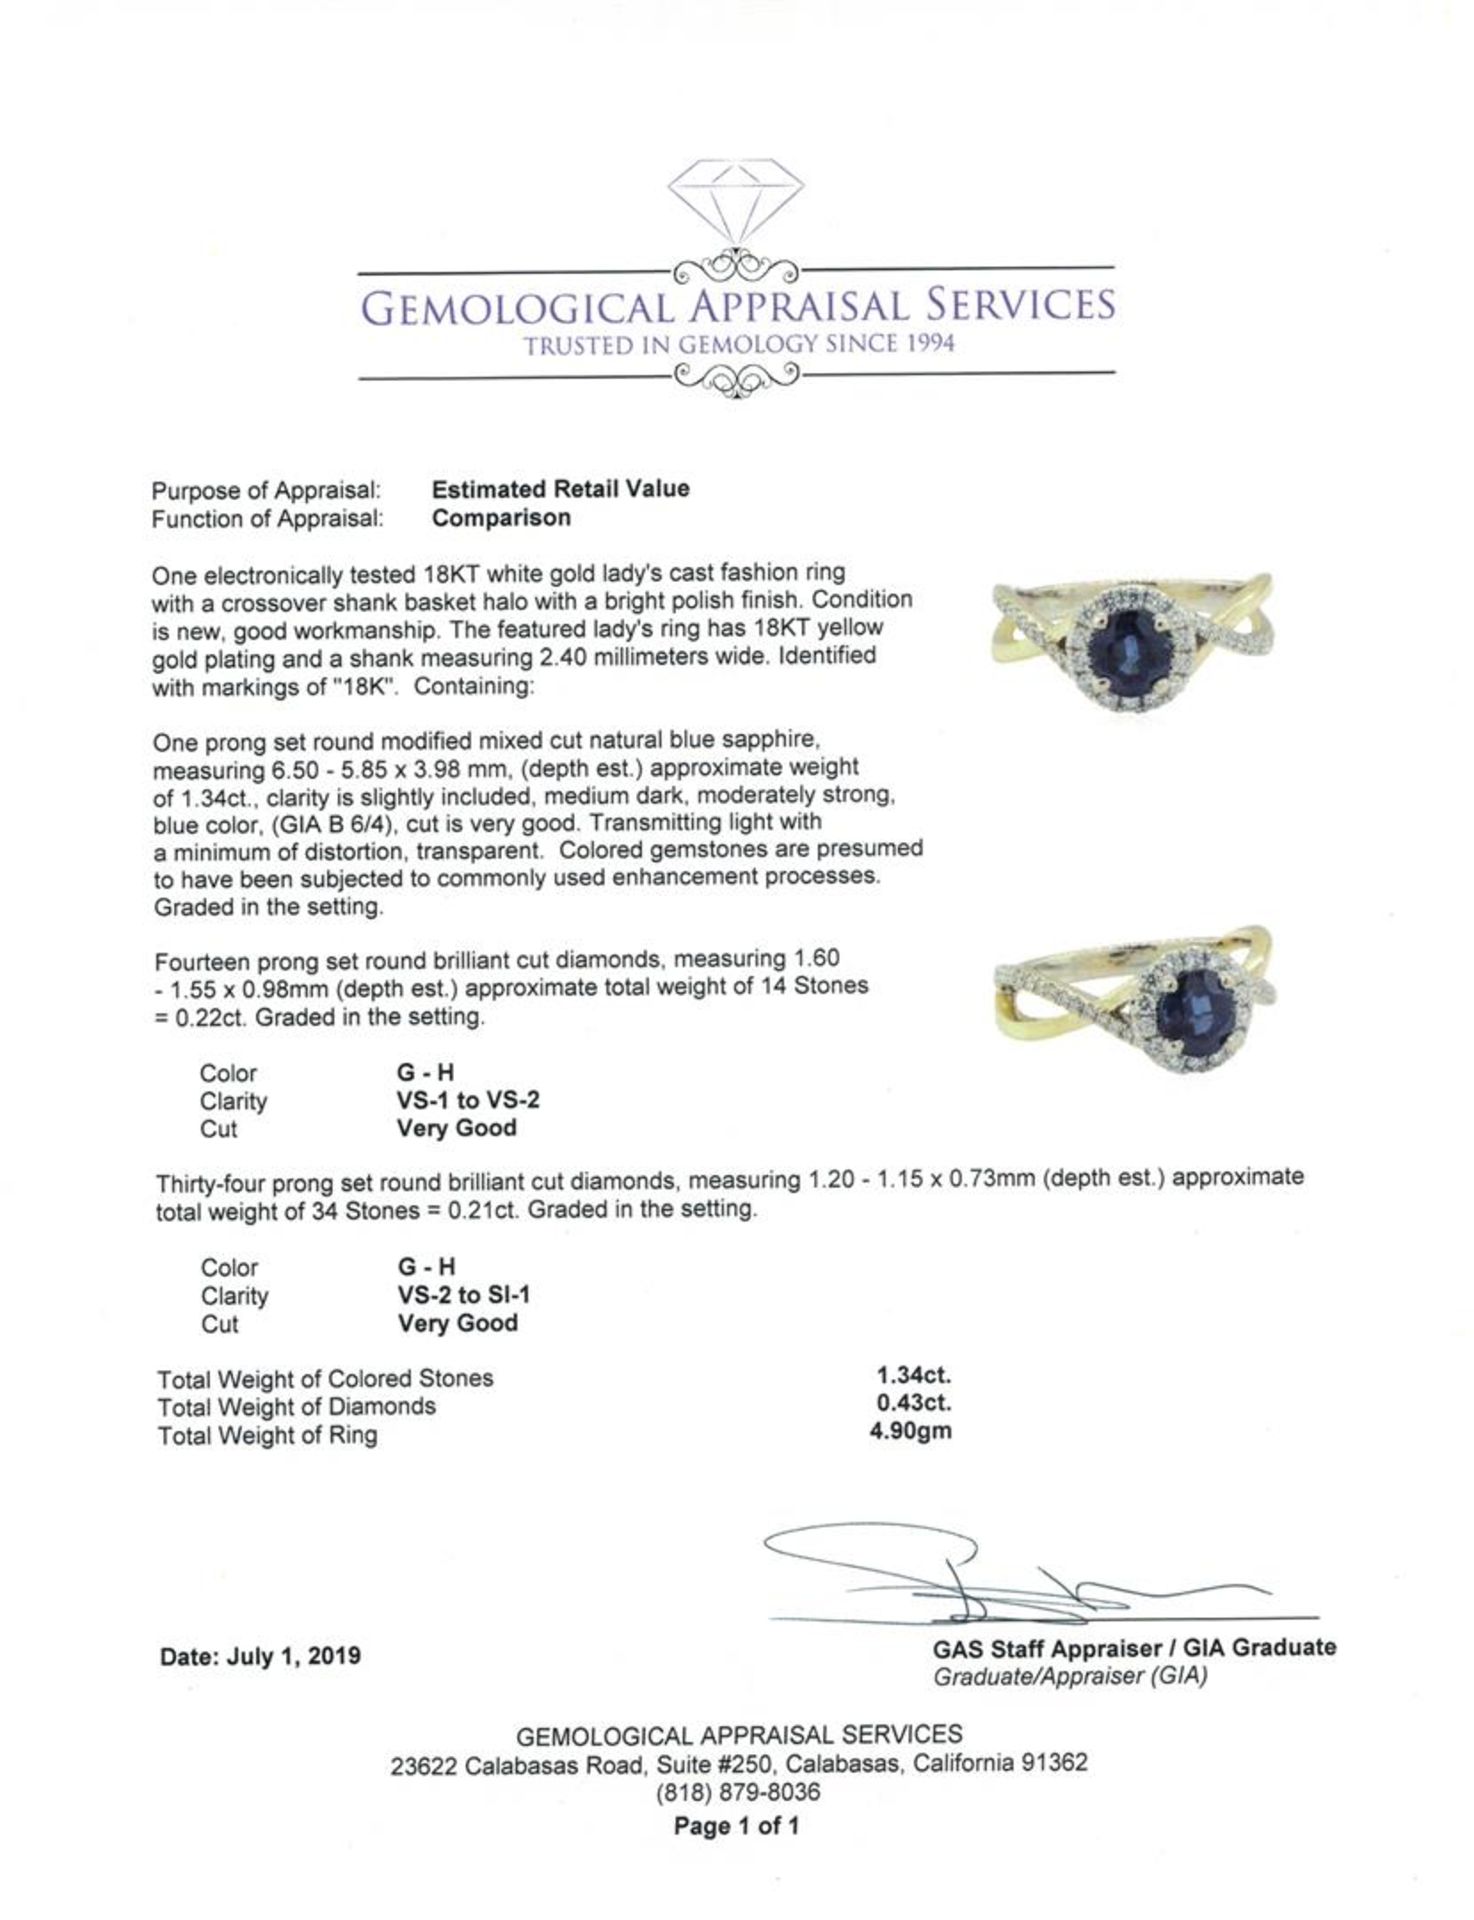 1.77 ctw Sapphire and Diamond Ring - 18KT White Gold - Image 5 of 5